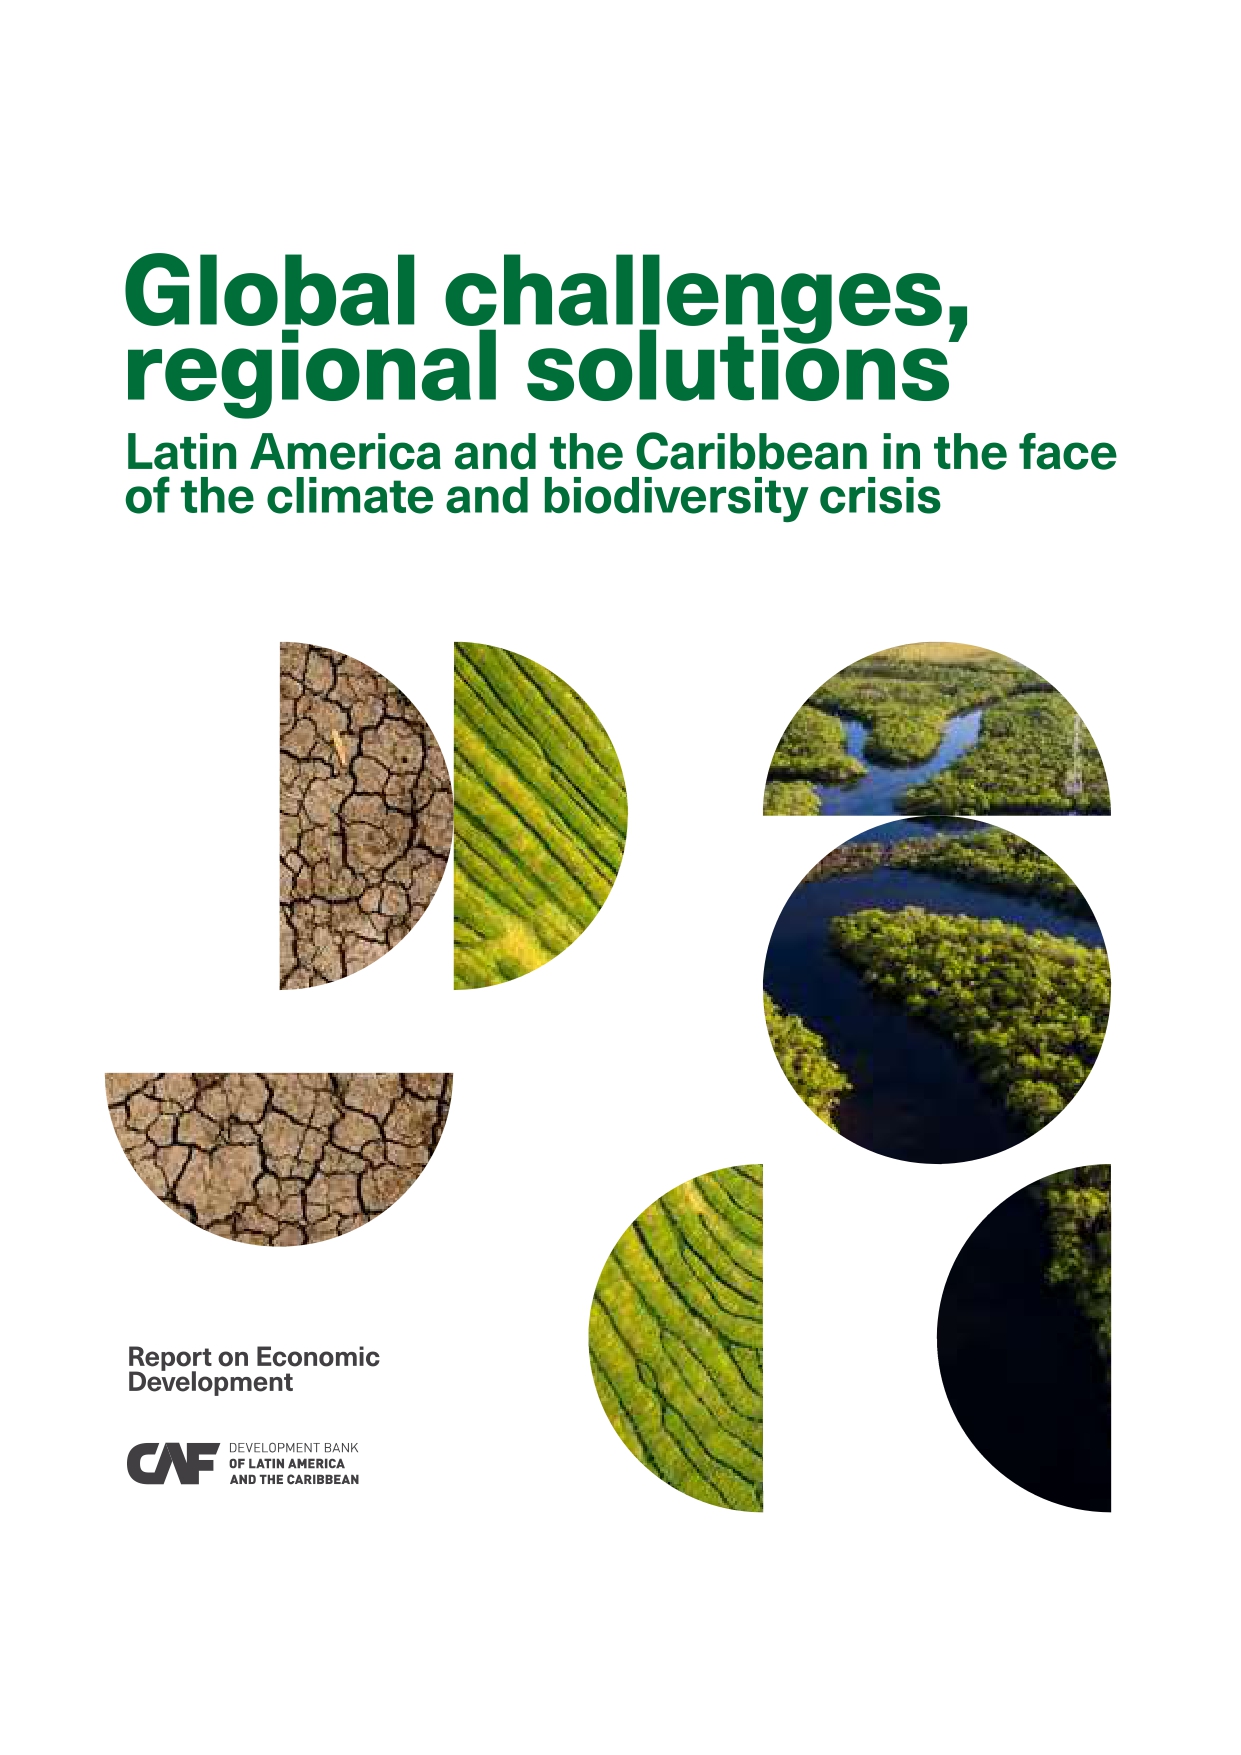 Global challenges, regional solutions: Latin America and the Caribbean in the face of the climate and biodiversity crisis